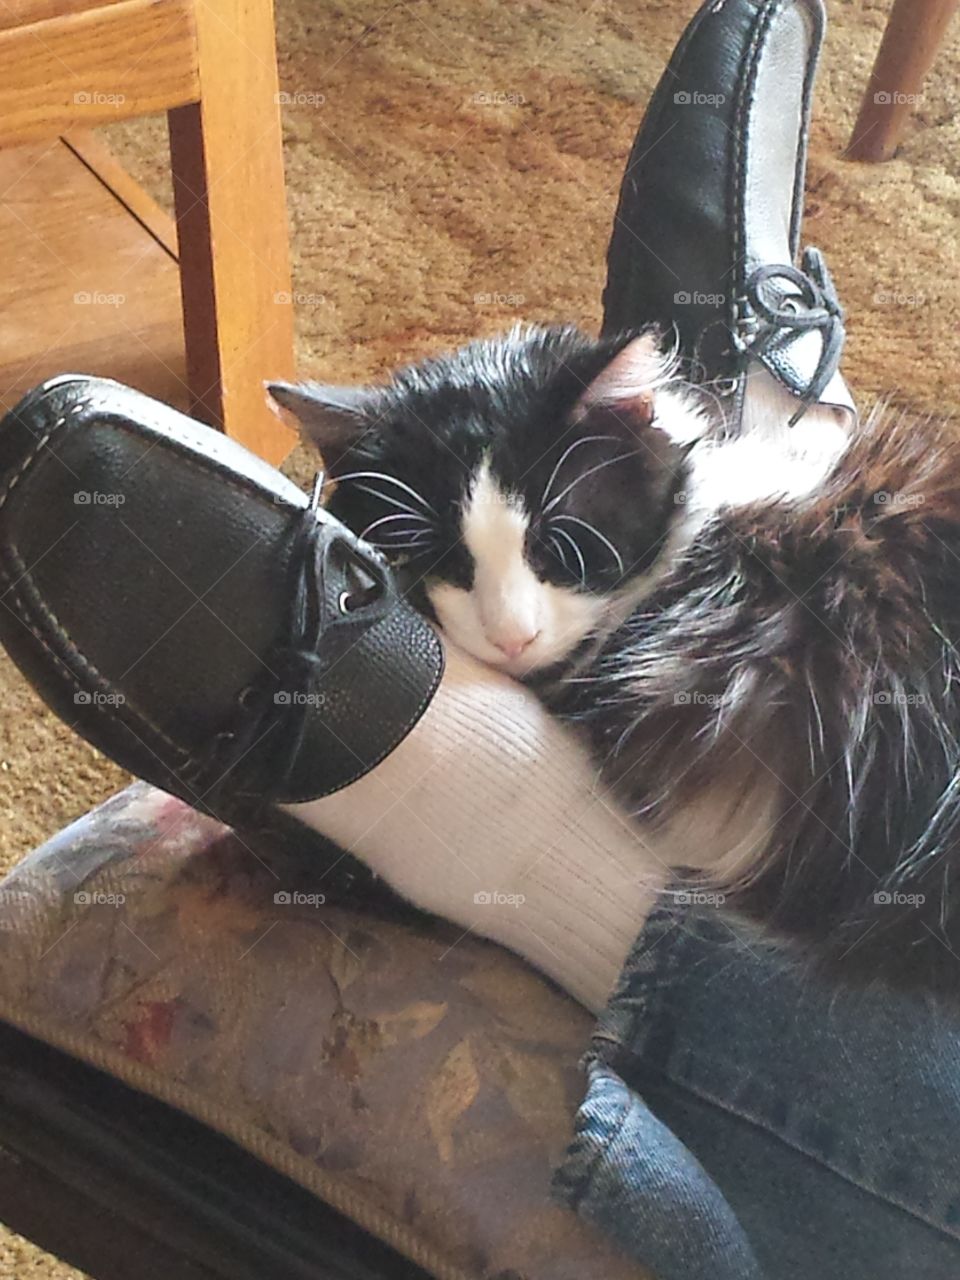 Daddy's shoes, the best pillows